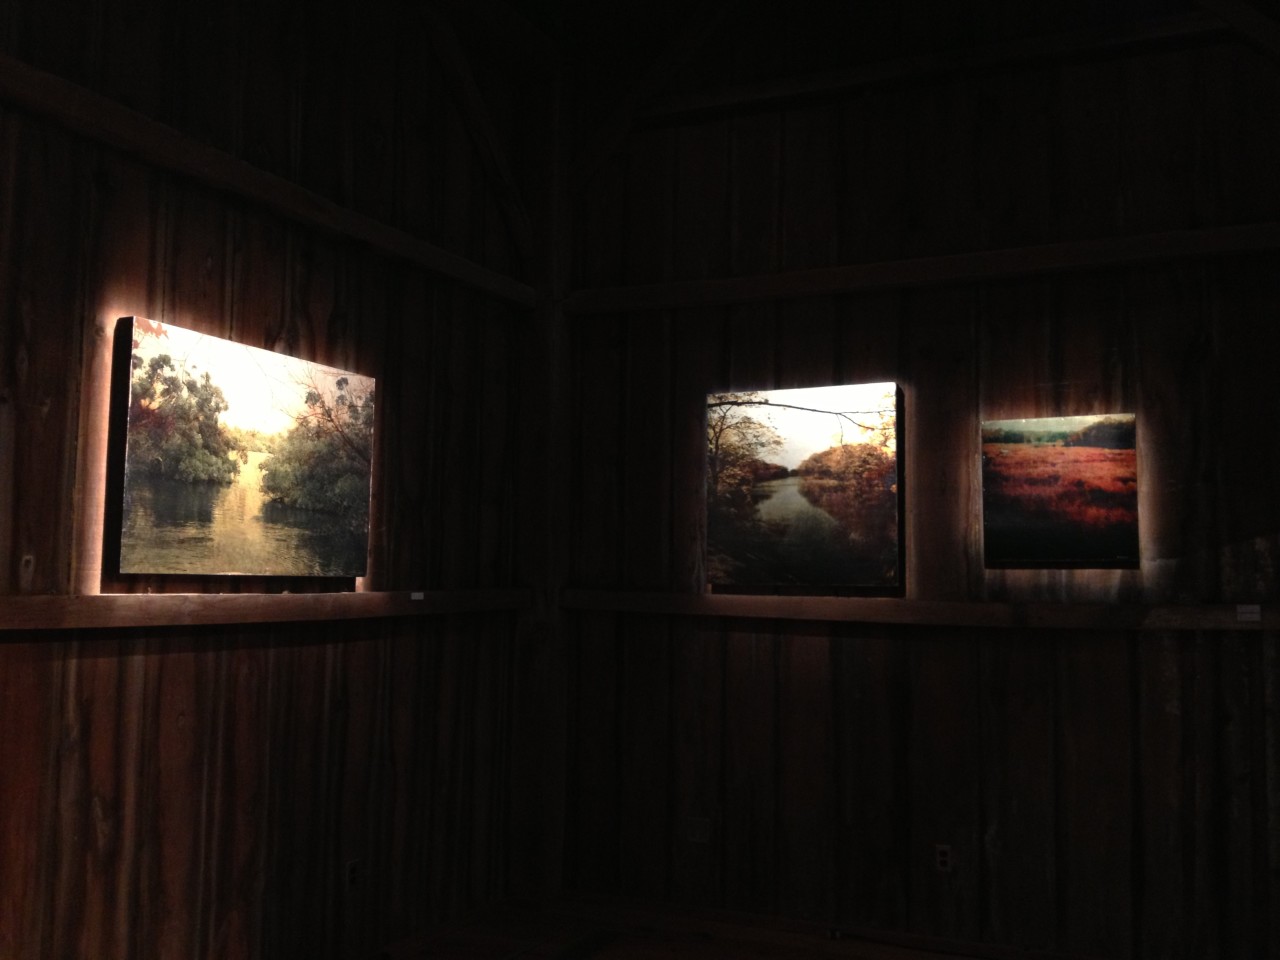 Installation view, River of Grass at The Barn at Flint Woods